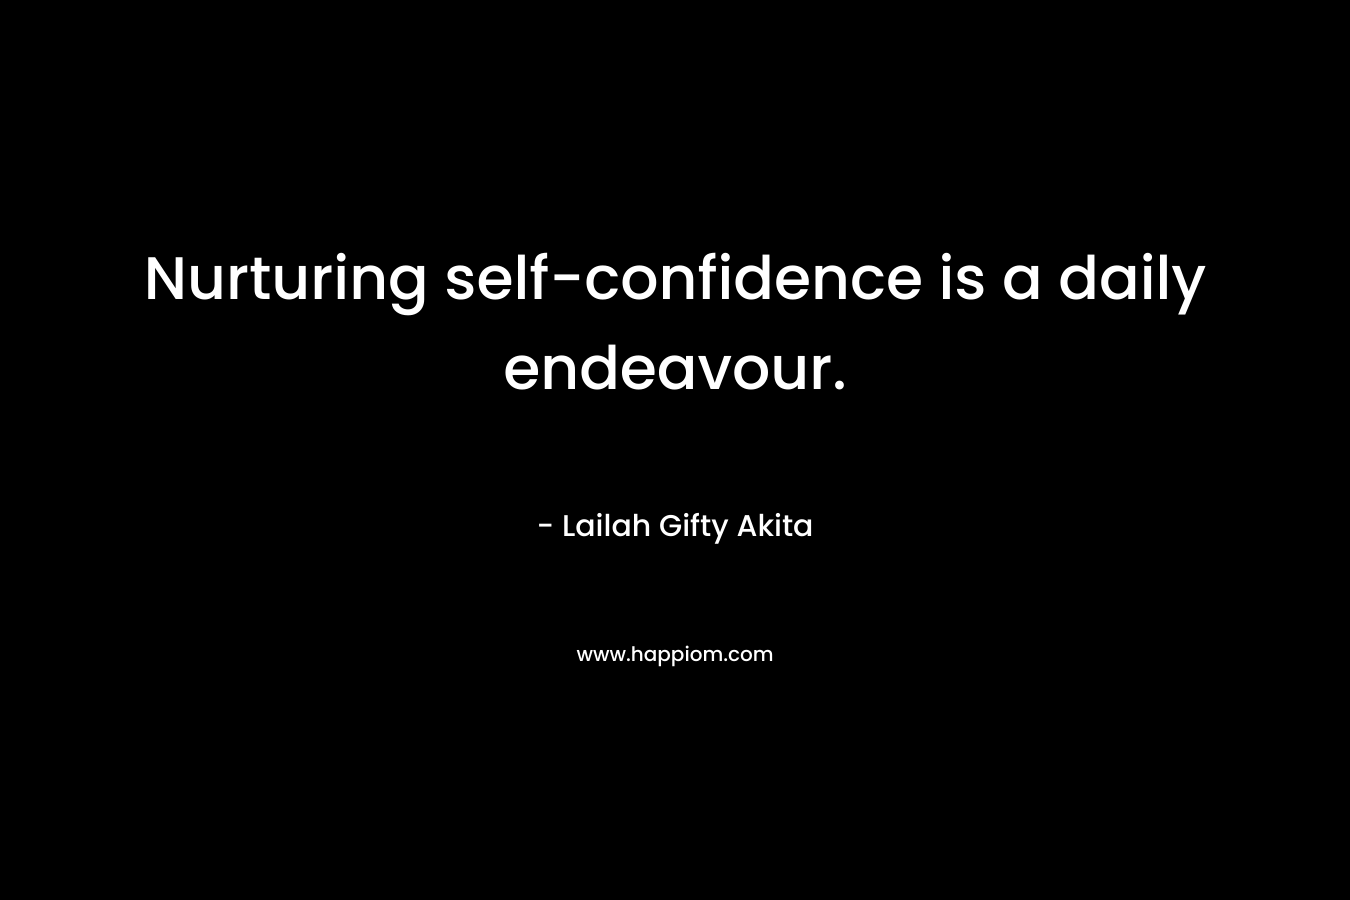 Nurturing self-confidence is a daily endeavour. – Lailah Gifty Akita